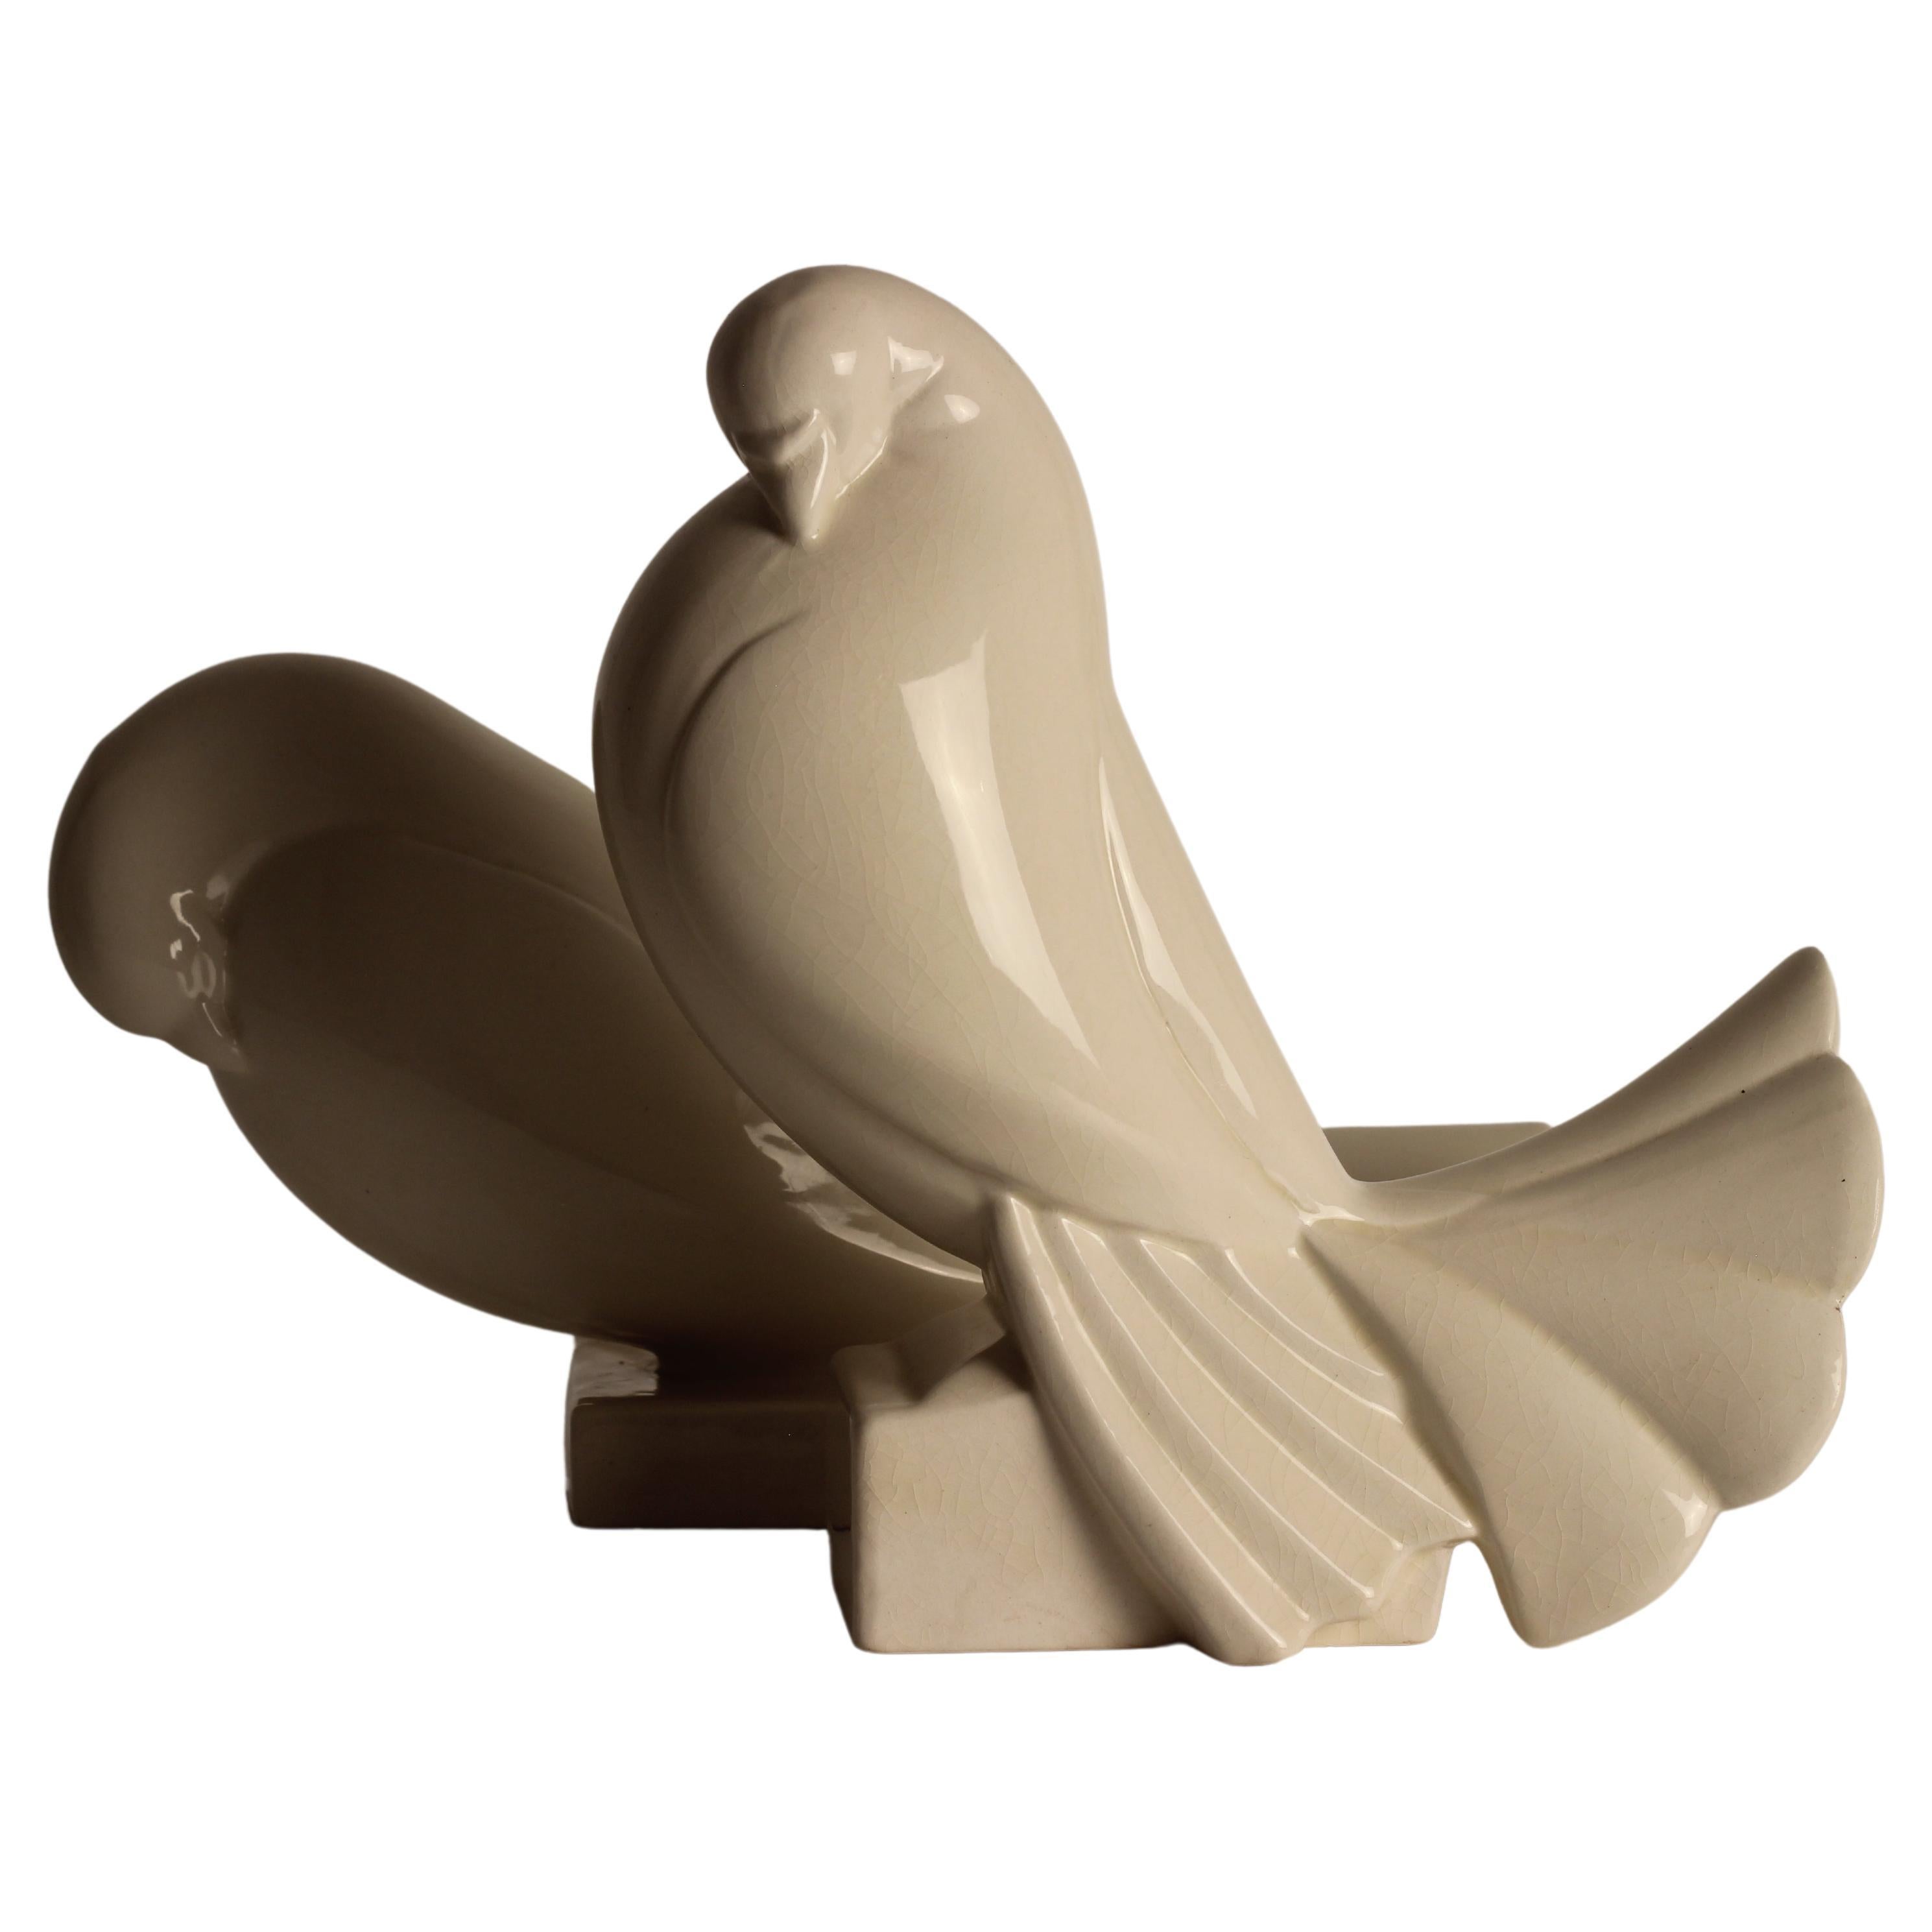 Jacques Adnet 1925 Crackled Ceramic Pair of White Peace Turtledove Sculptures